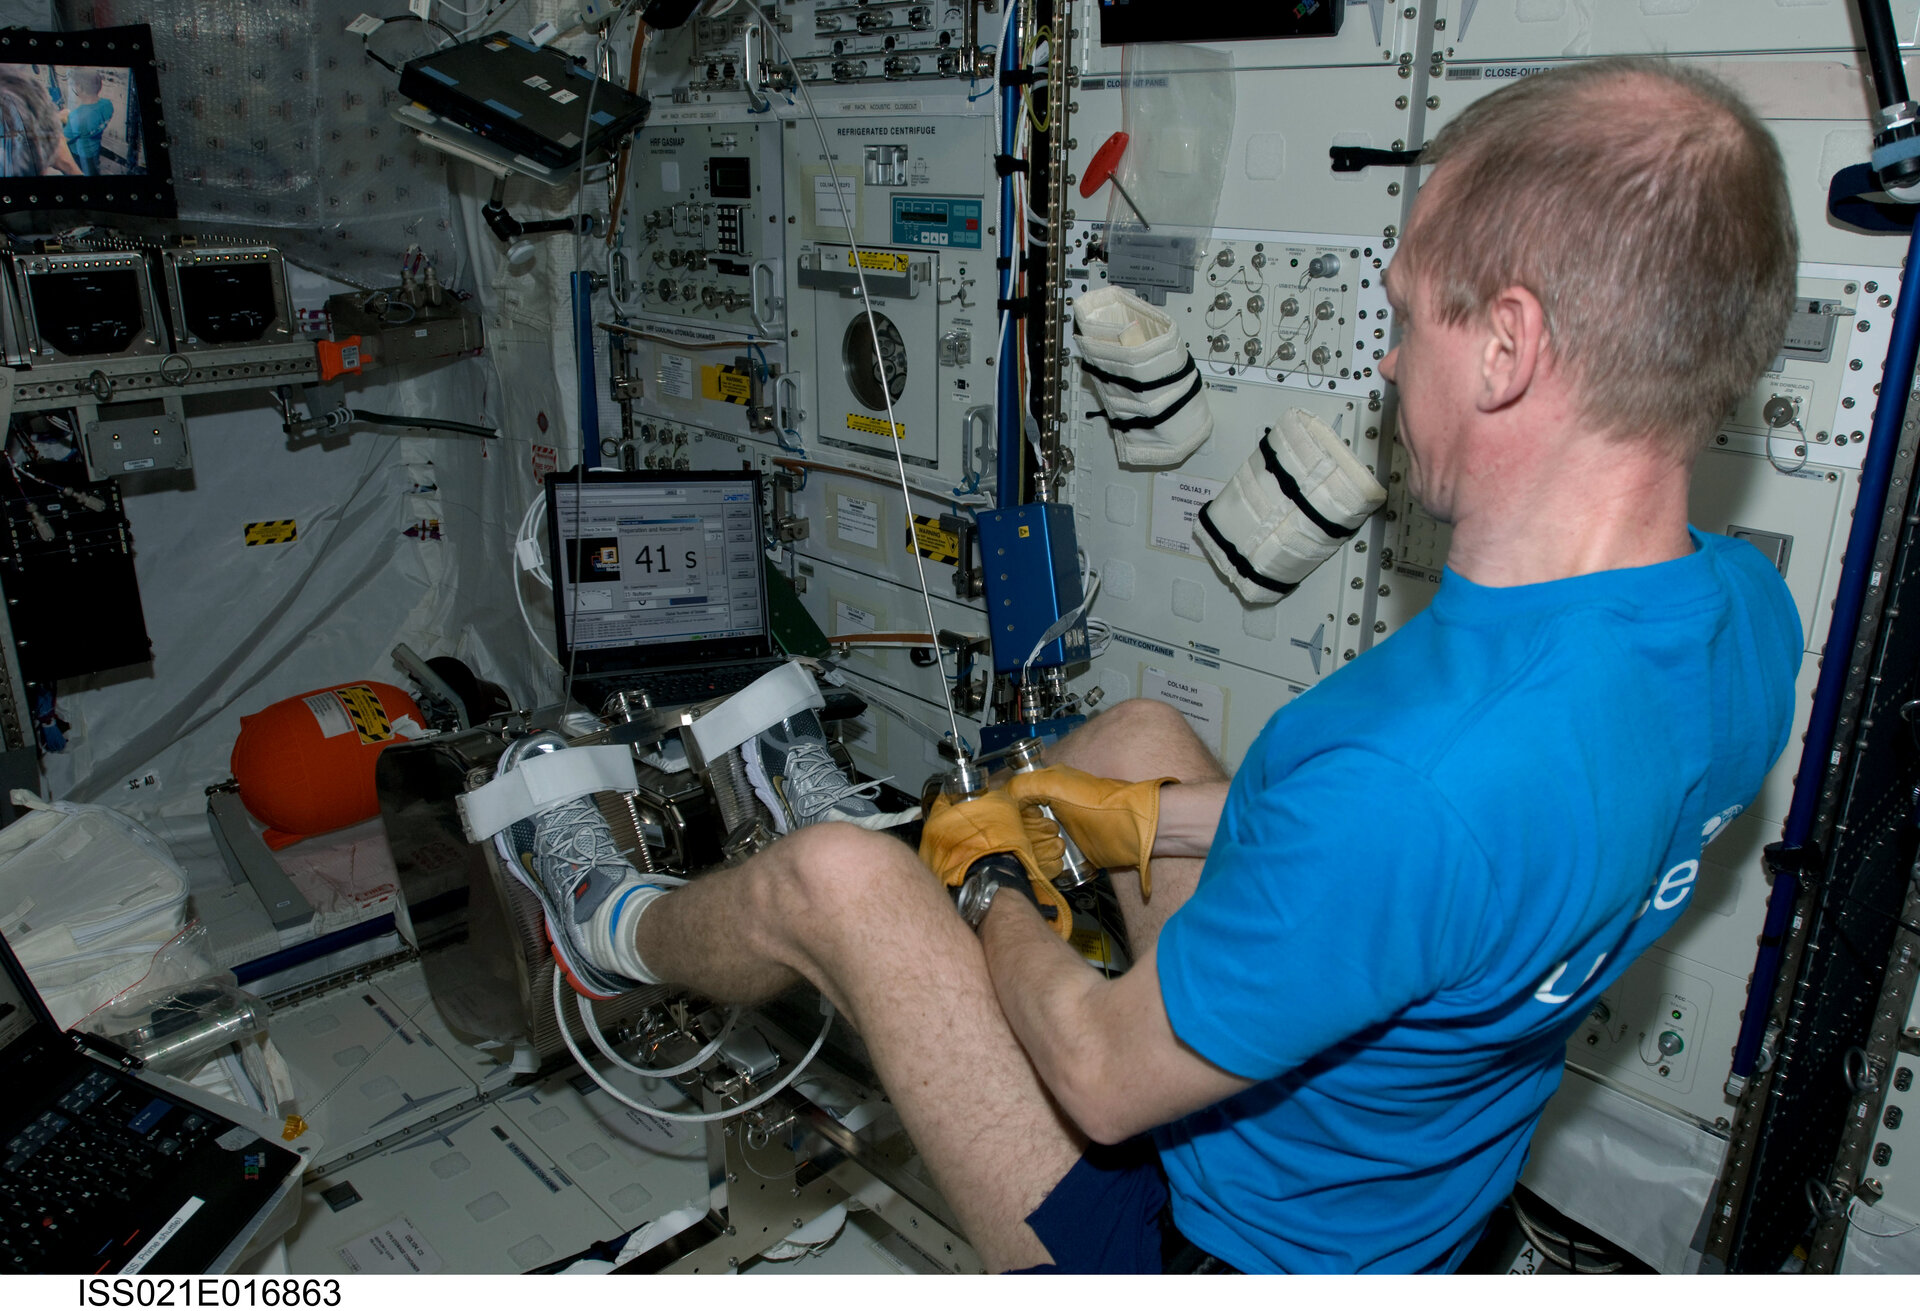 Frank De Winne performs checkout of the ESA Flywheel Exercise Device